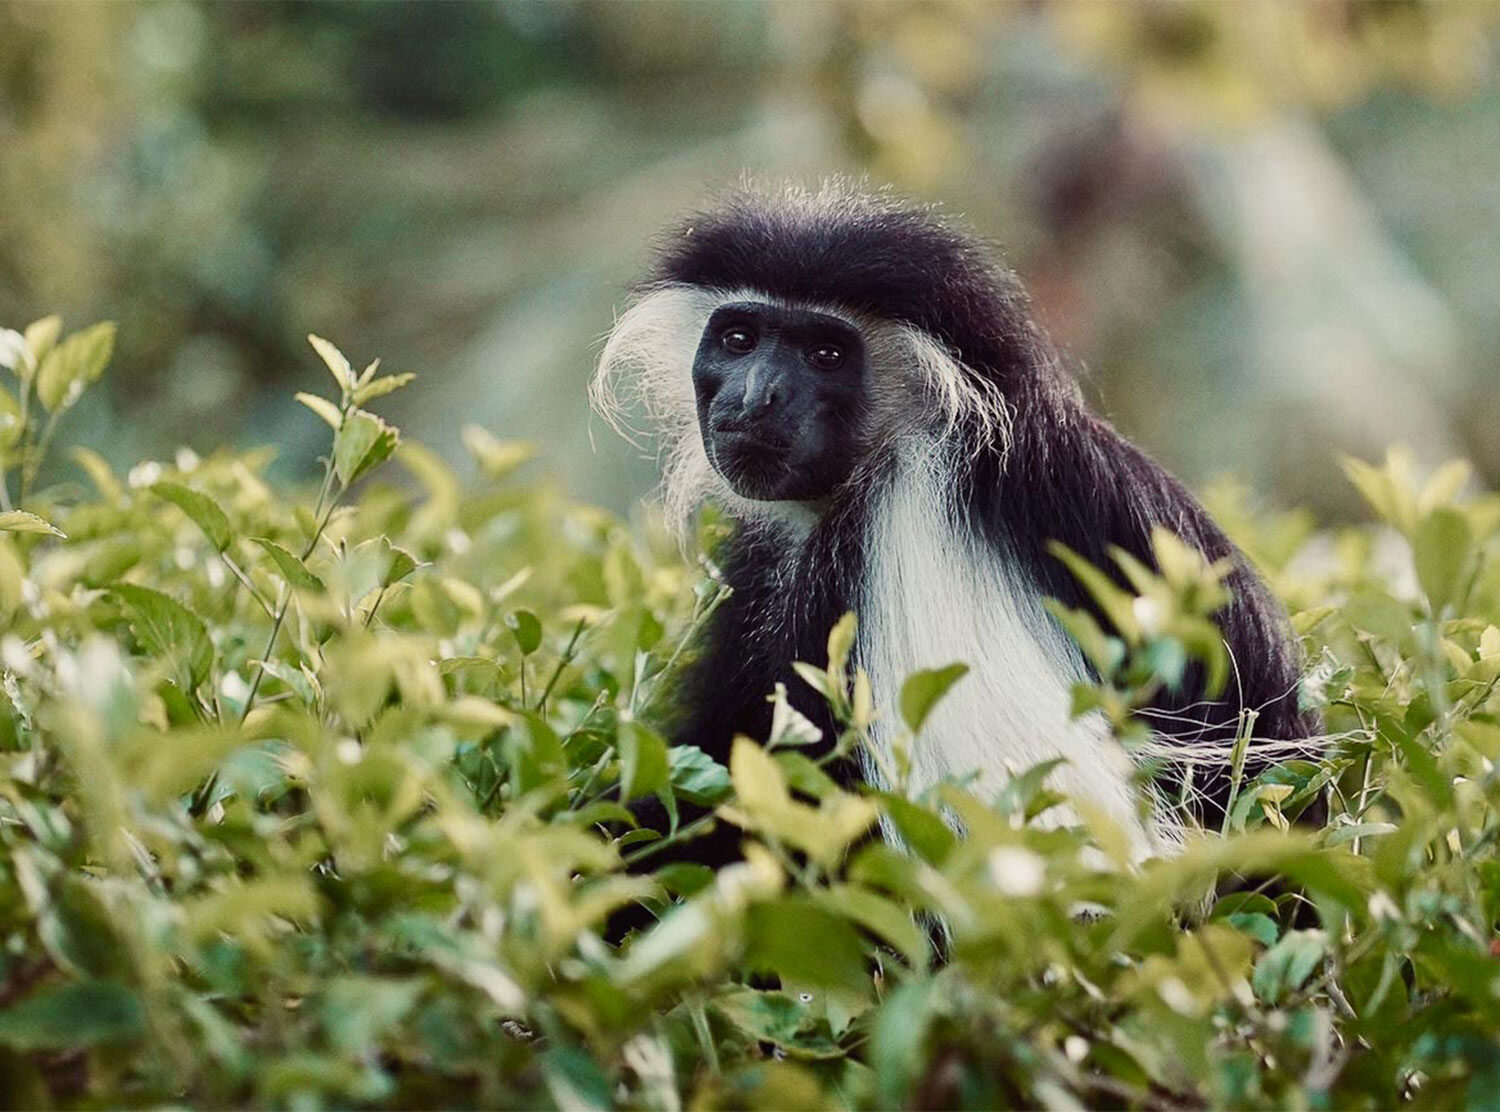 Kinondo Kwetu The local tribe of colobus monkeys prefer to stay high in the treetops, but every now and then they descended down to the lower brush to snack